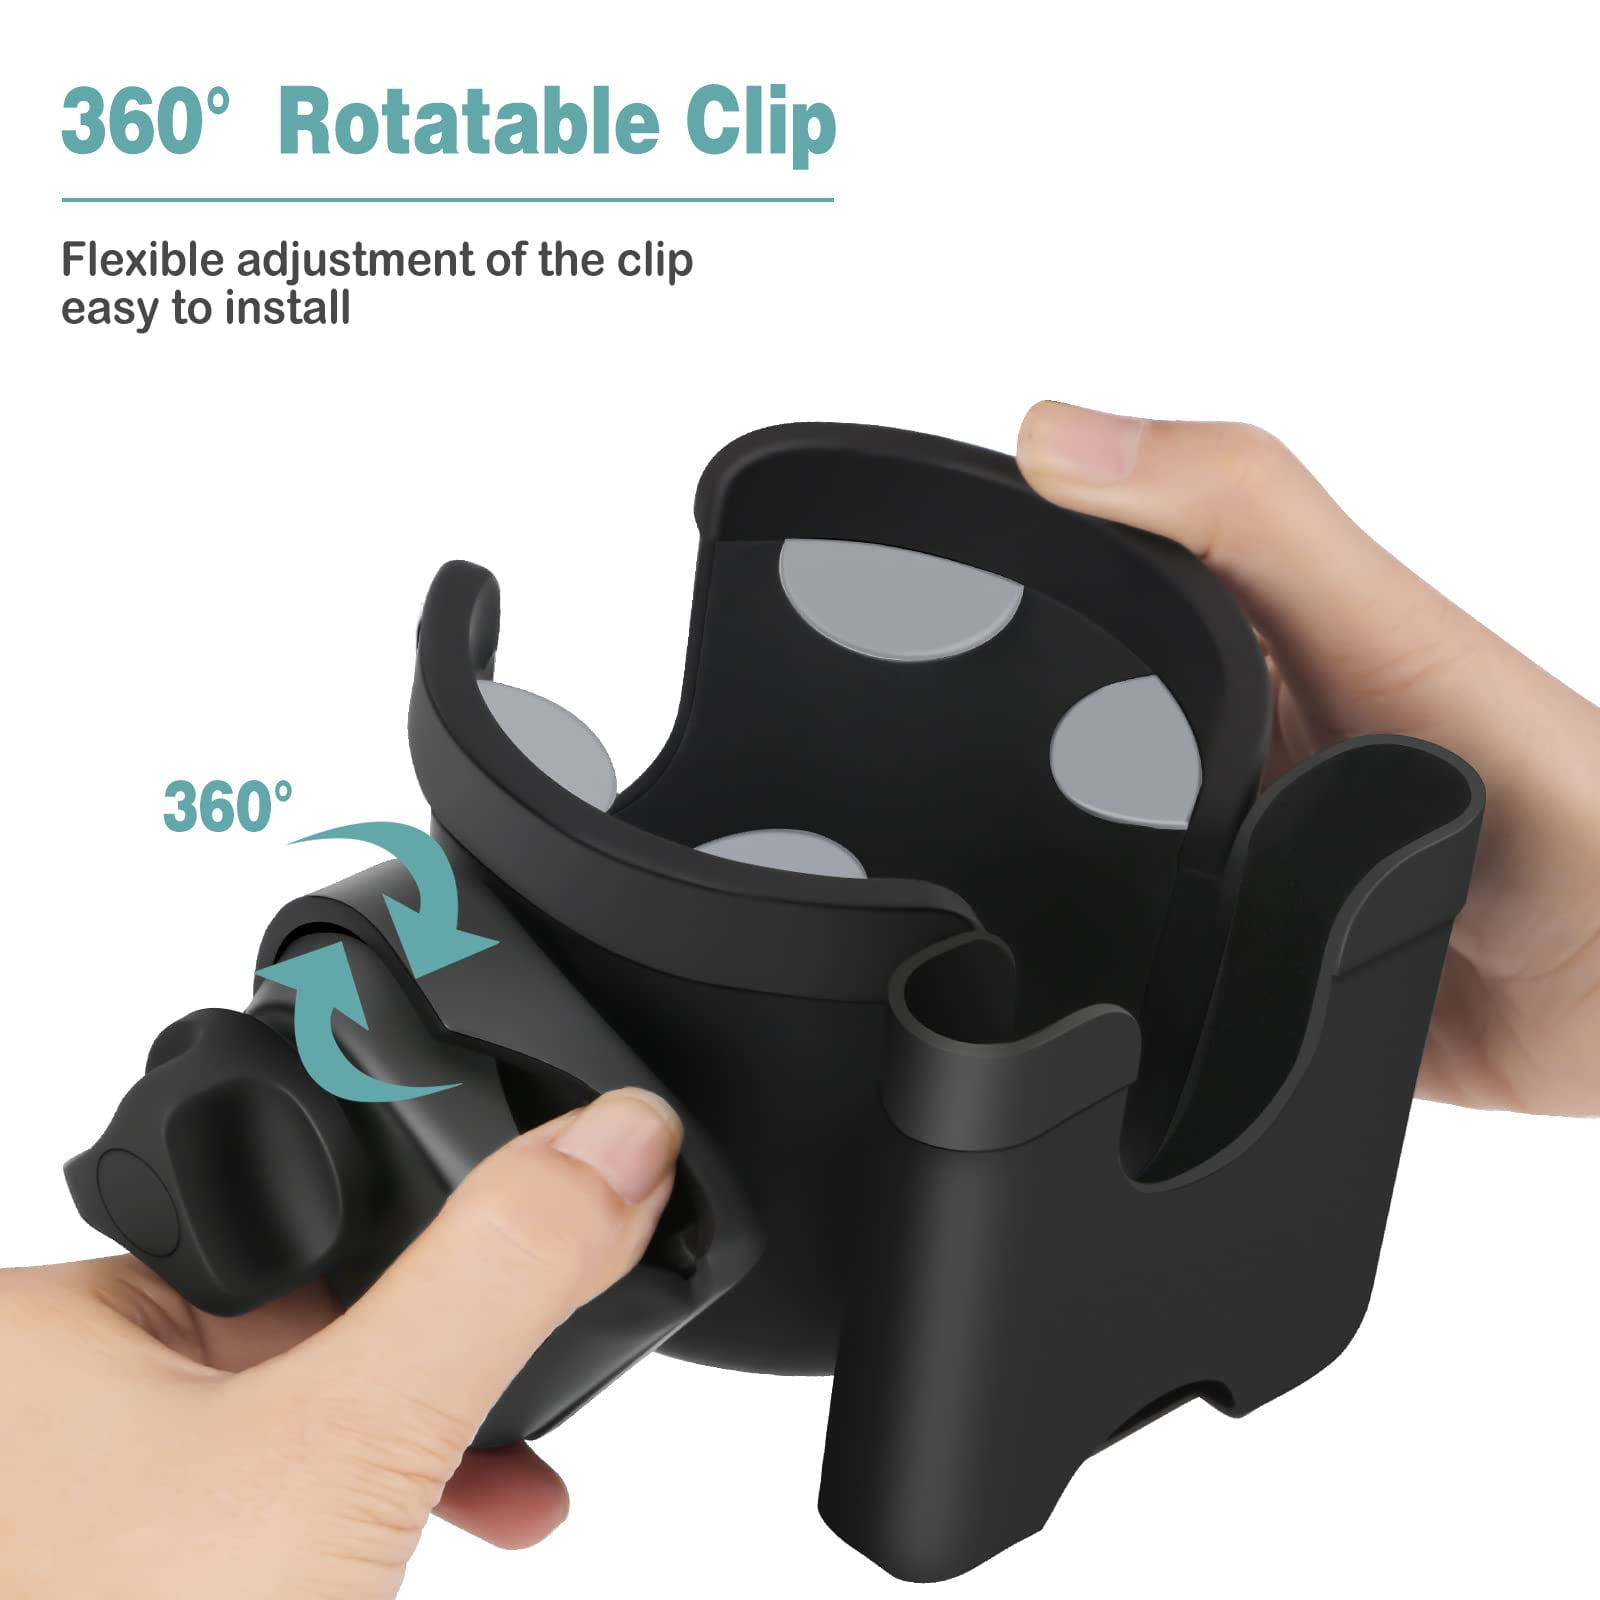 Travelwant Walker Cup Holder-2 in 1 Universal Baby Stroller Cup